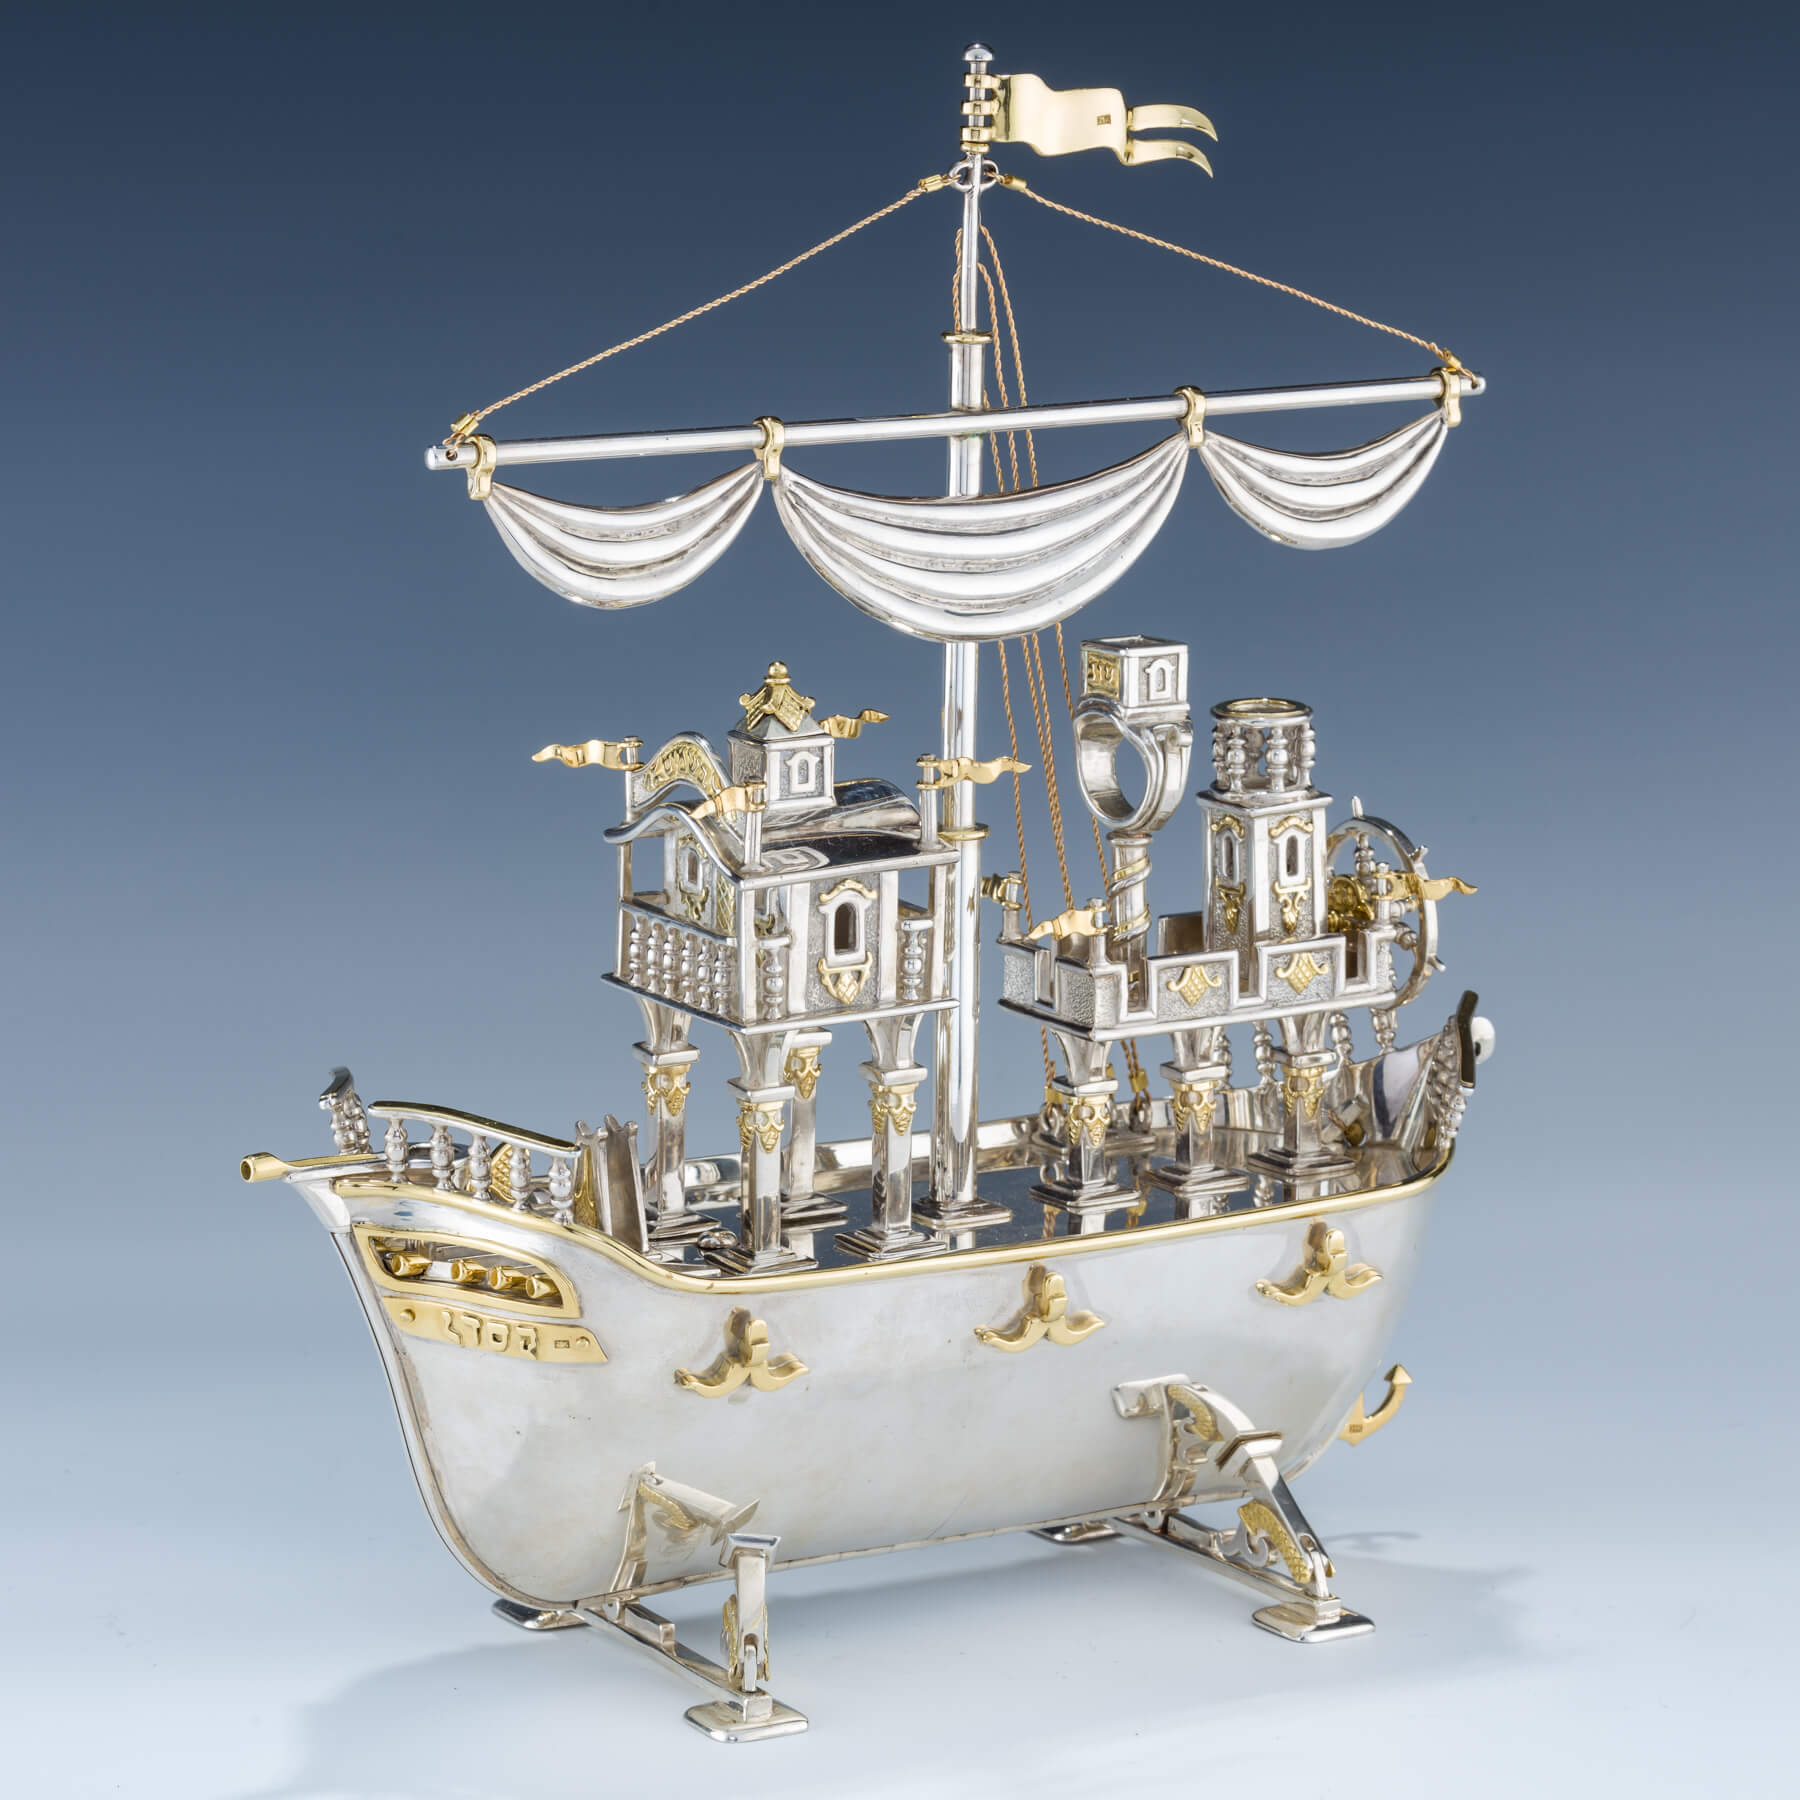 103. A Yossi Swed Partial Gilt Silver Galleon-Form Seder Set And Display Case, 20Th Century